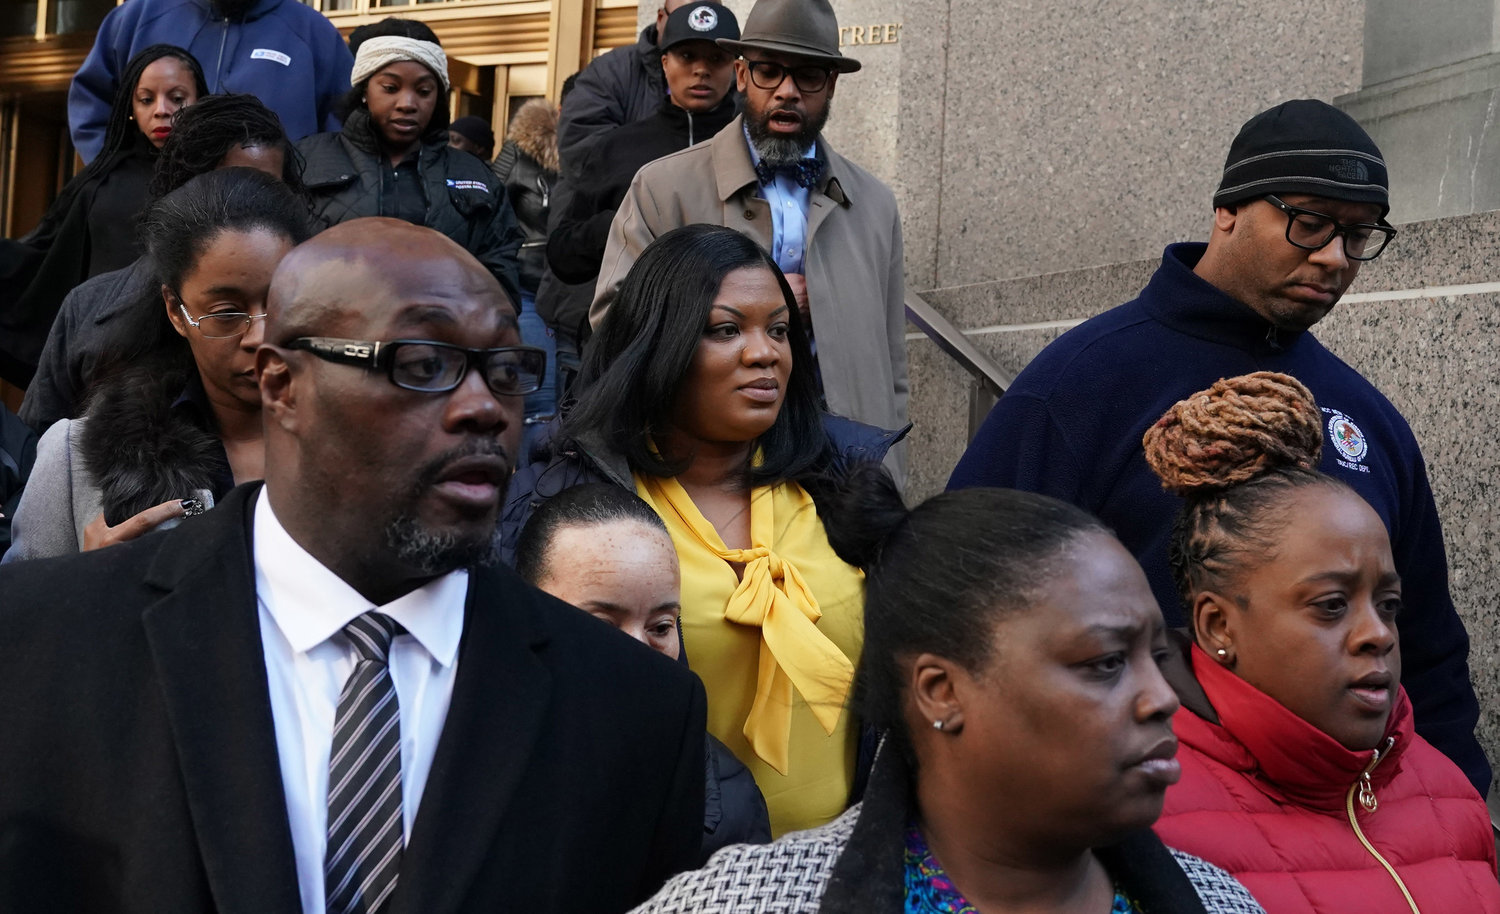 In this photo from Nov. 25, 2019, Metropolitan Correctional Center guard Tova Noel (yellow shirt) surrounded by supporters leaves Federal Court in New York City. Noel and another guard had been charged with falsifying prison records on the night Jeffrey Epstein died. (TIMOTHY A. CLARY/AFP via Getty Images/TNS)